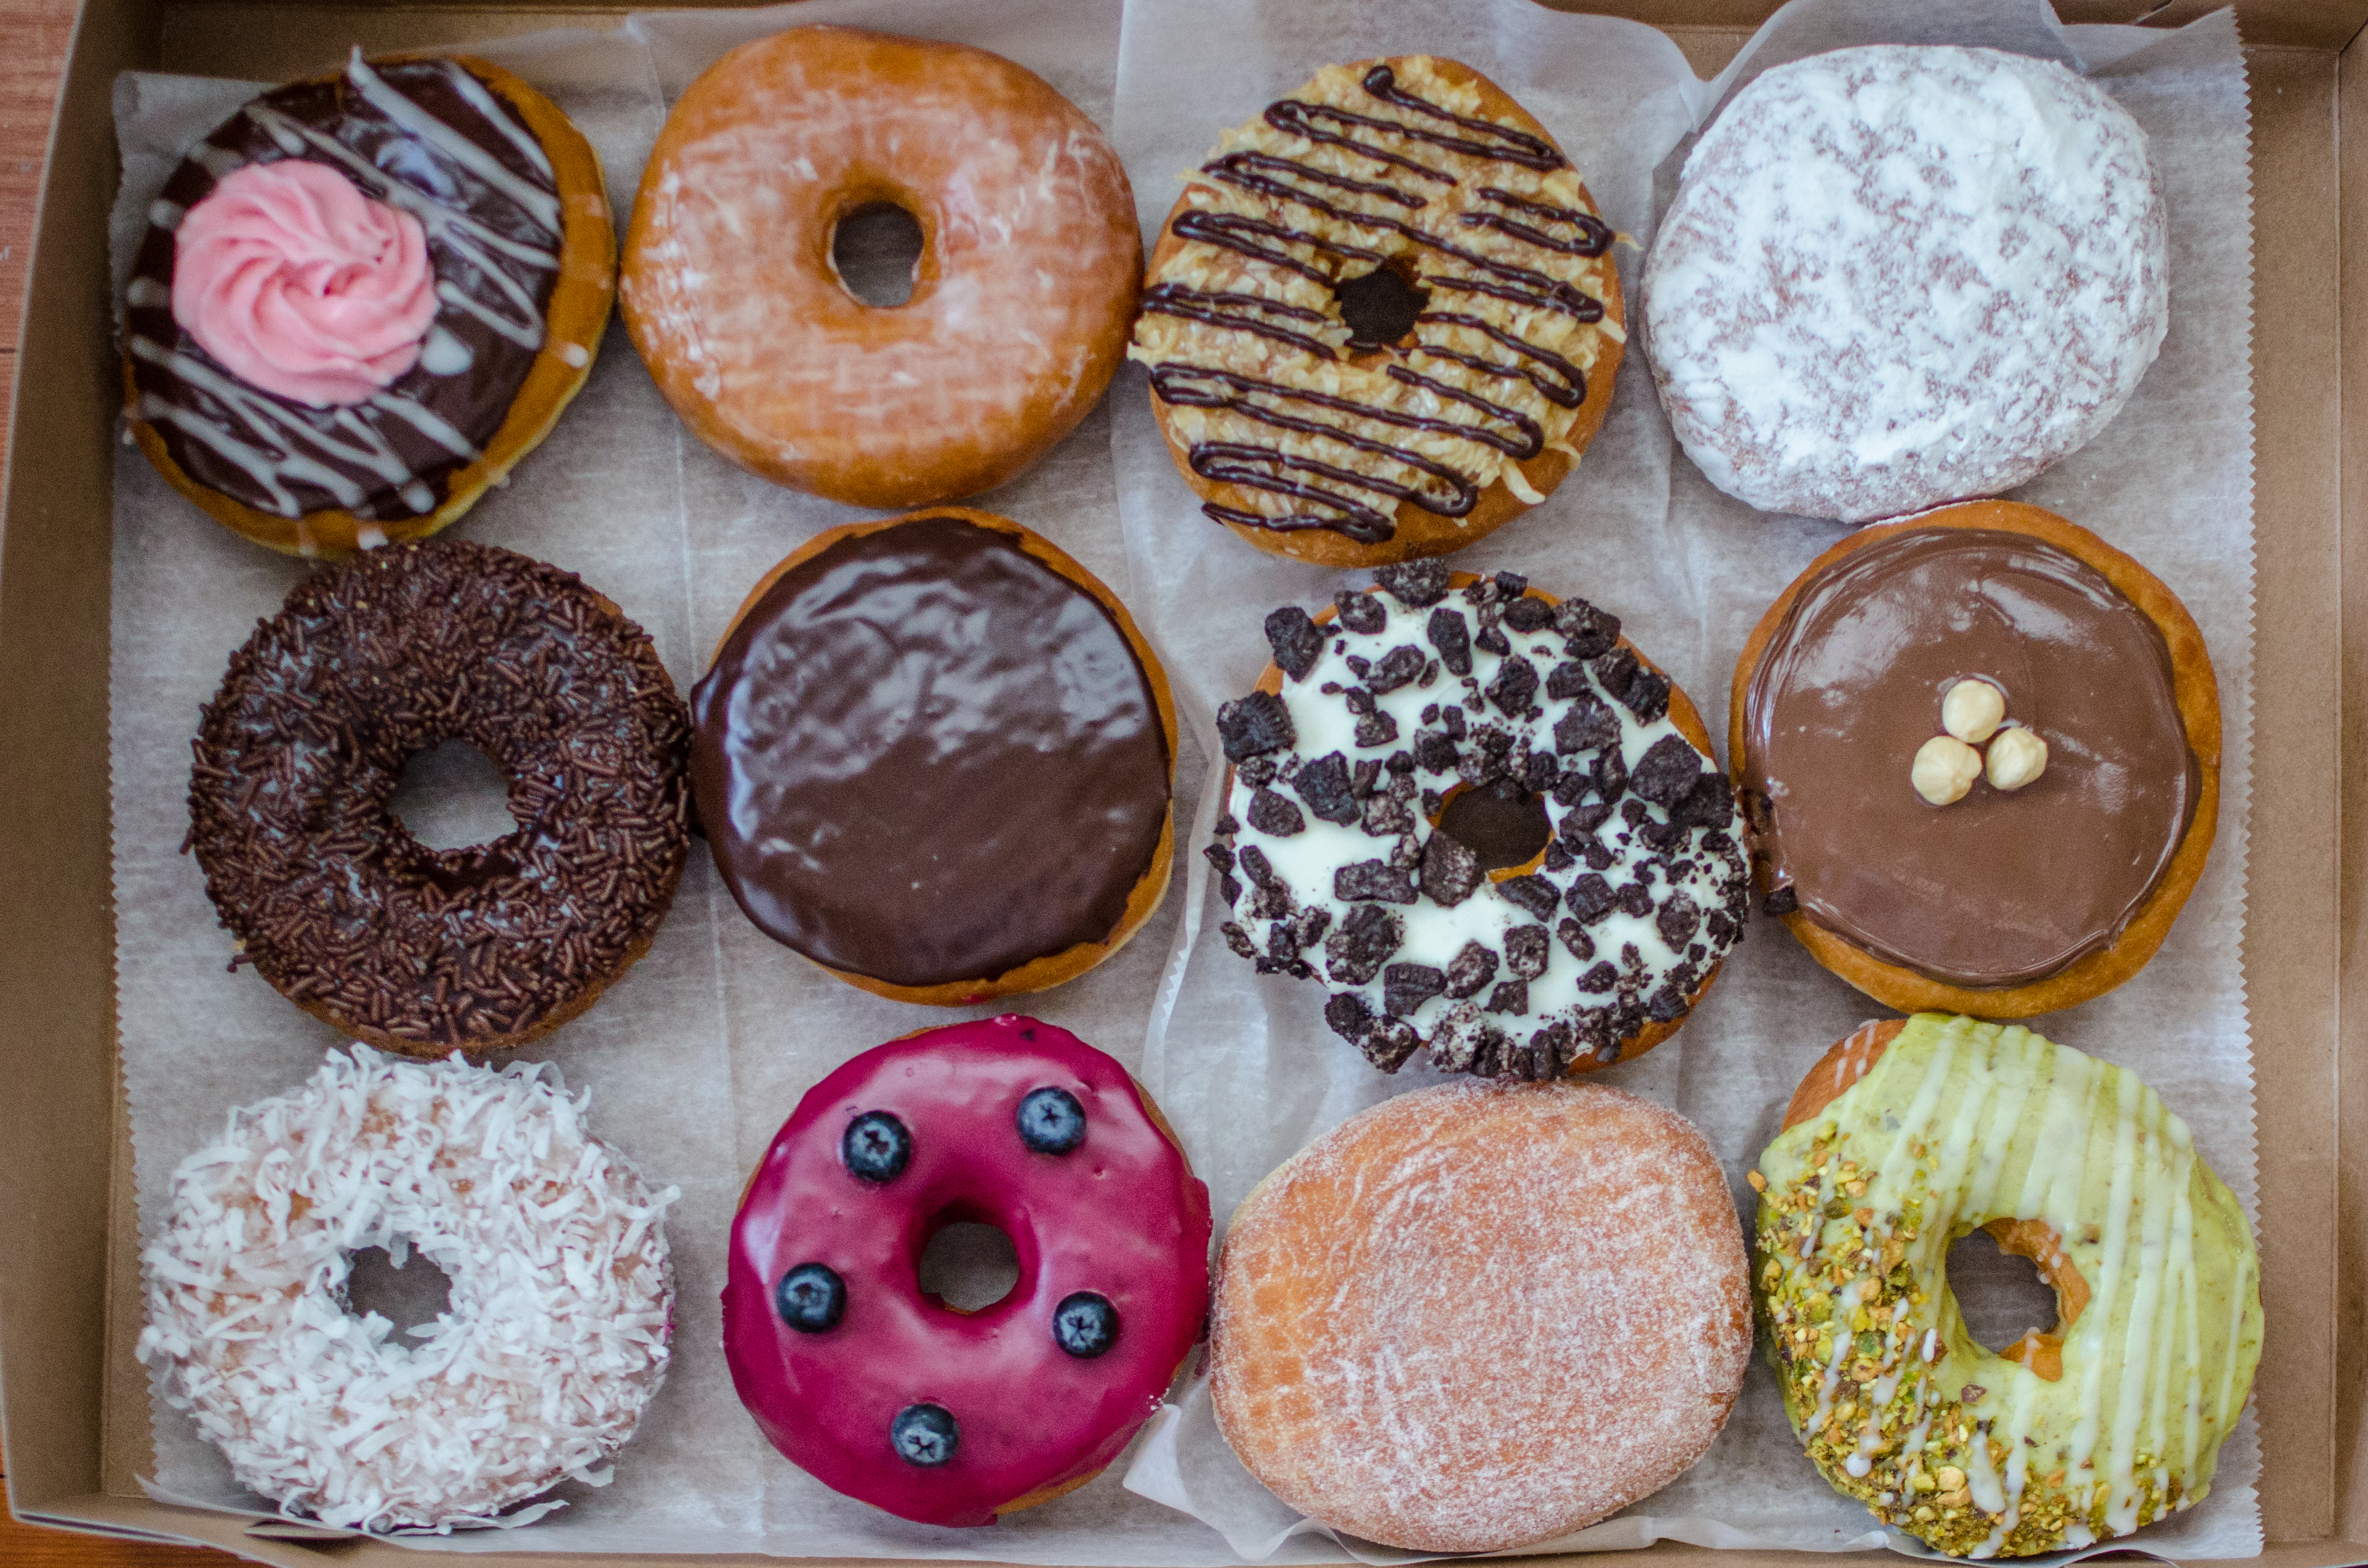 Overhead view of a dozen doughnuts, each a different flavor, lined up in three rows of four on wax paper in a cardboard box.